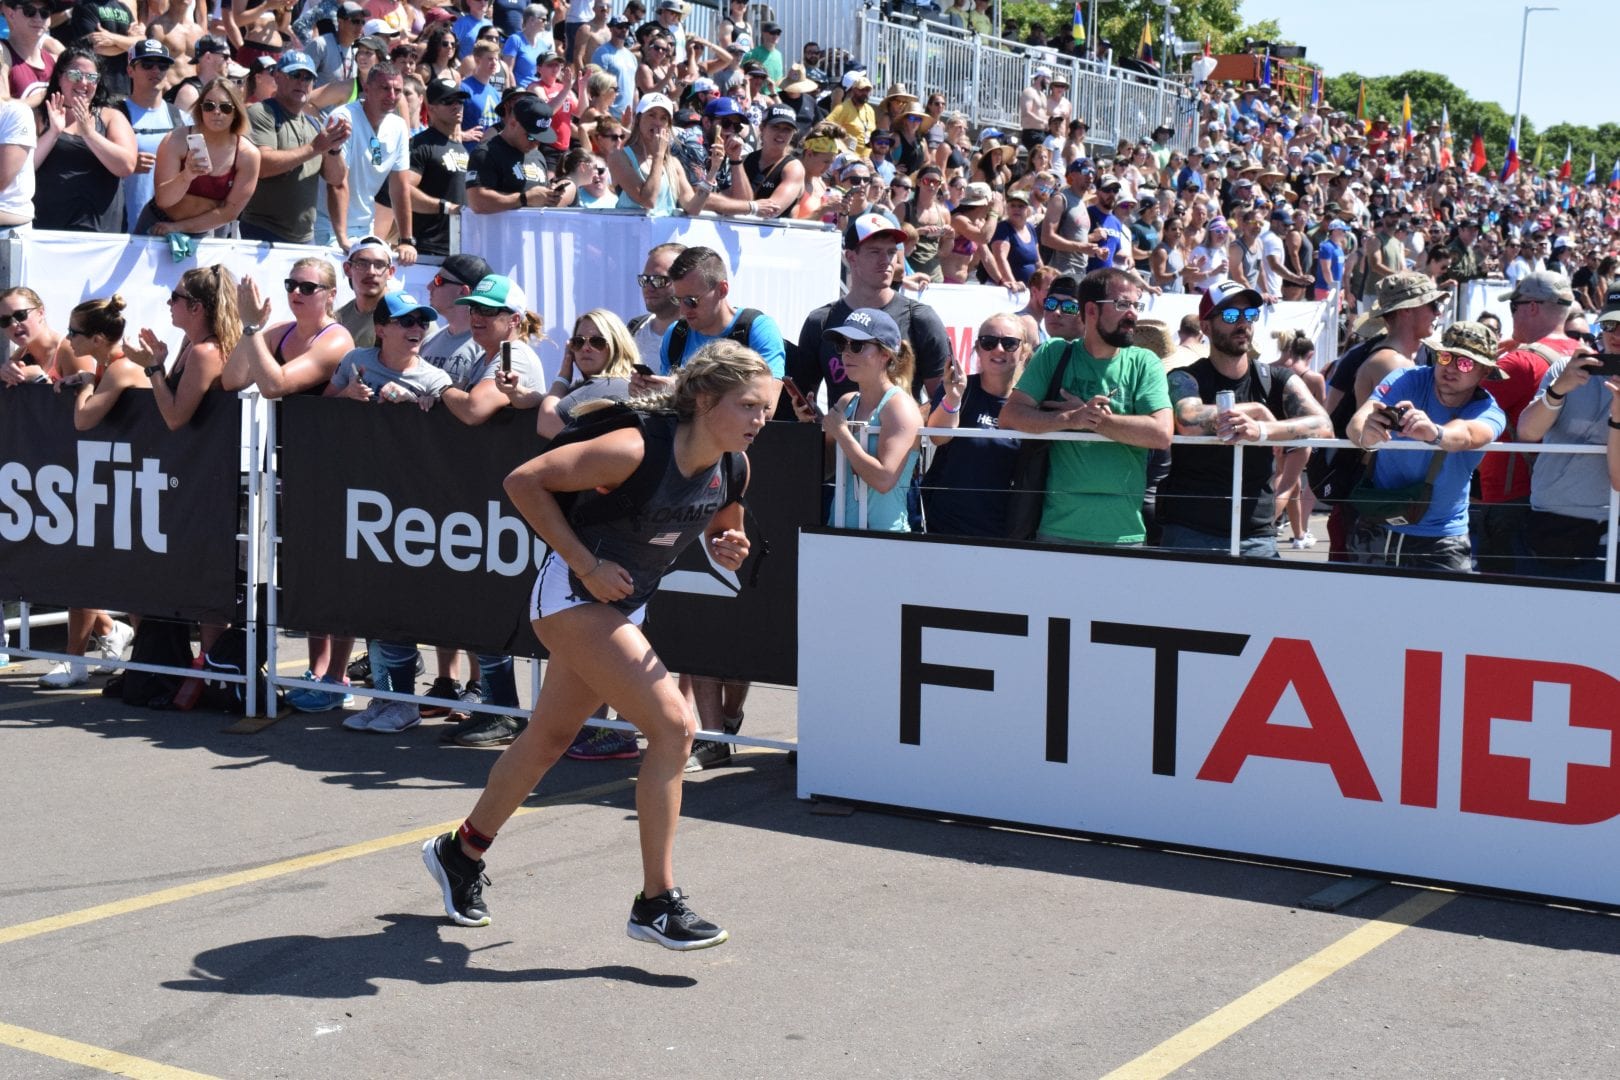 Haley Adams of CrossFit Mayhem completes the Ruck Run event at the 2019 CrossFit Games